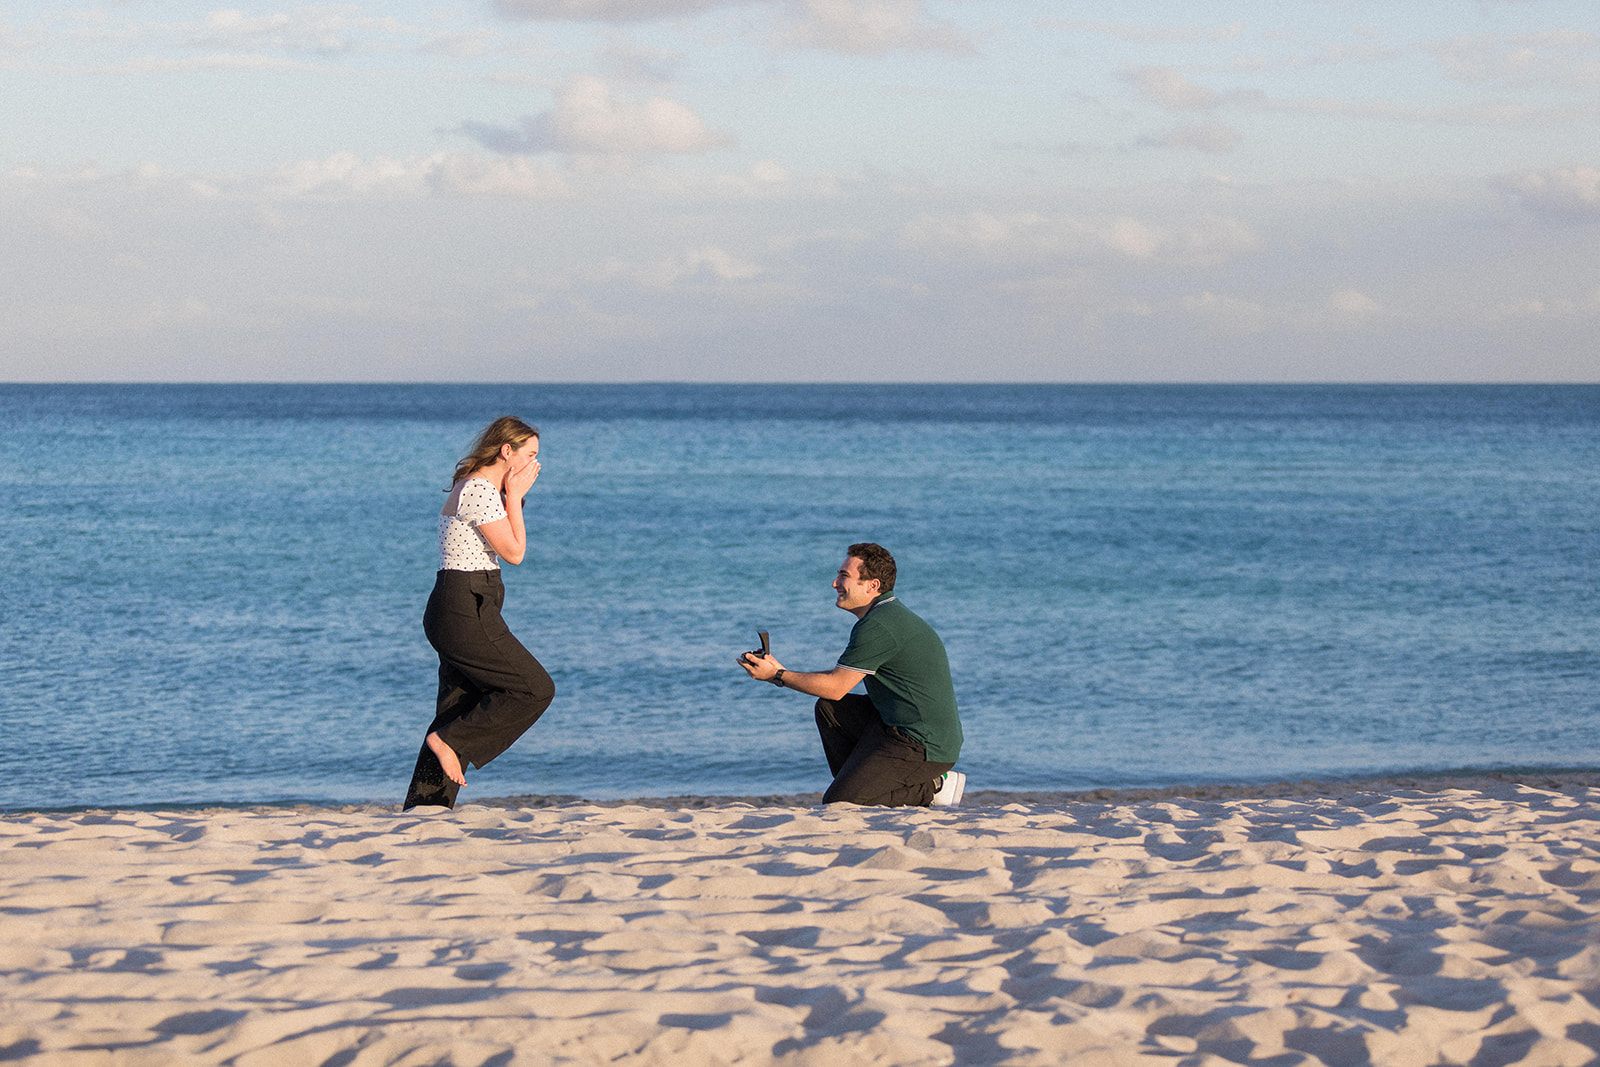 How to propose in Miami?
